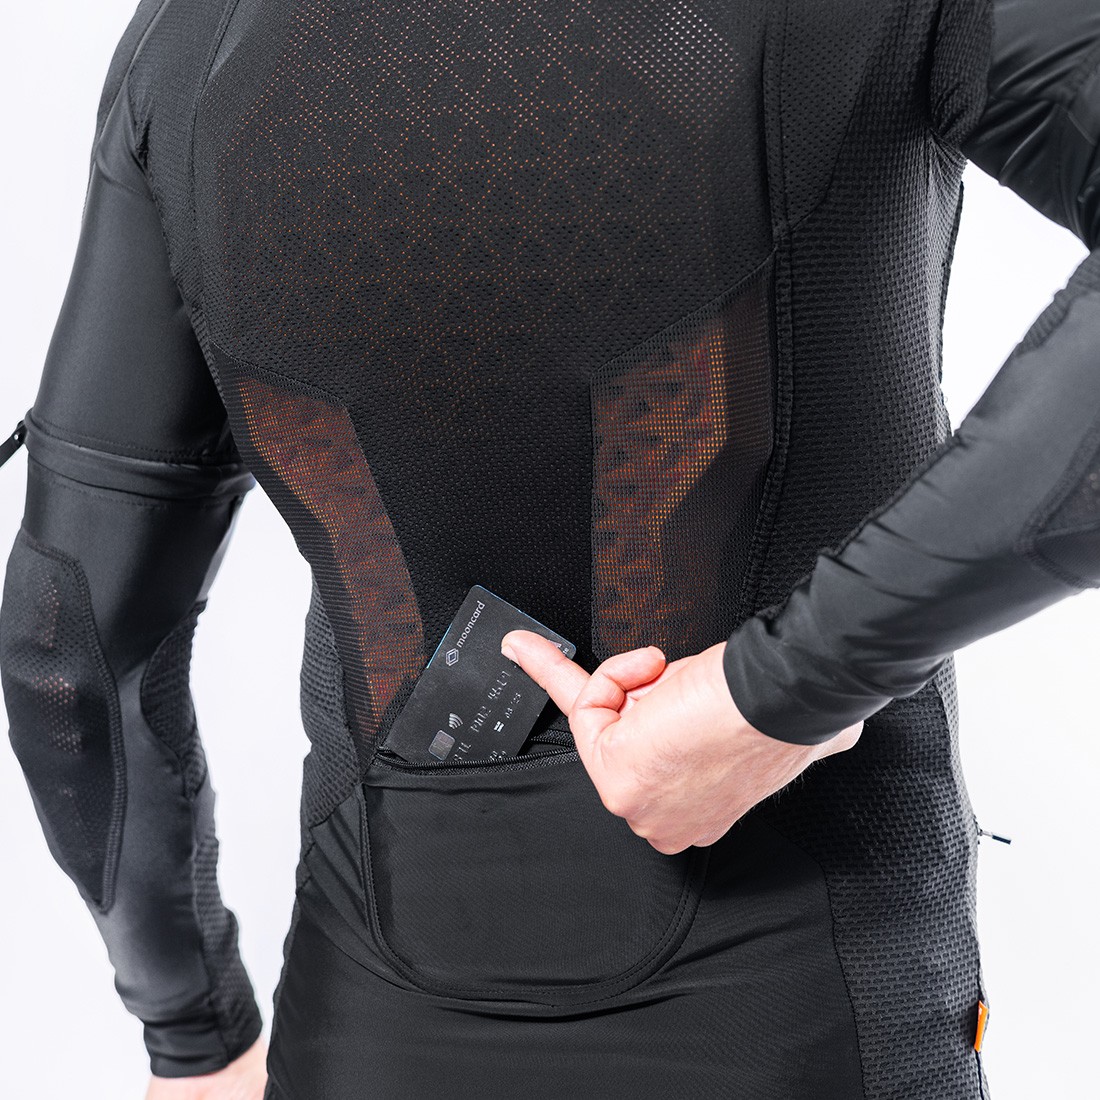 RACER1927® – MOTION TOP 2 - Protections vélo